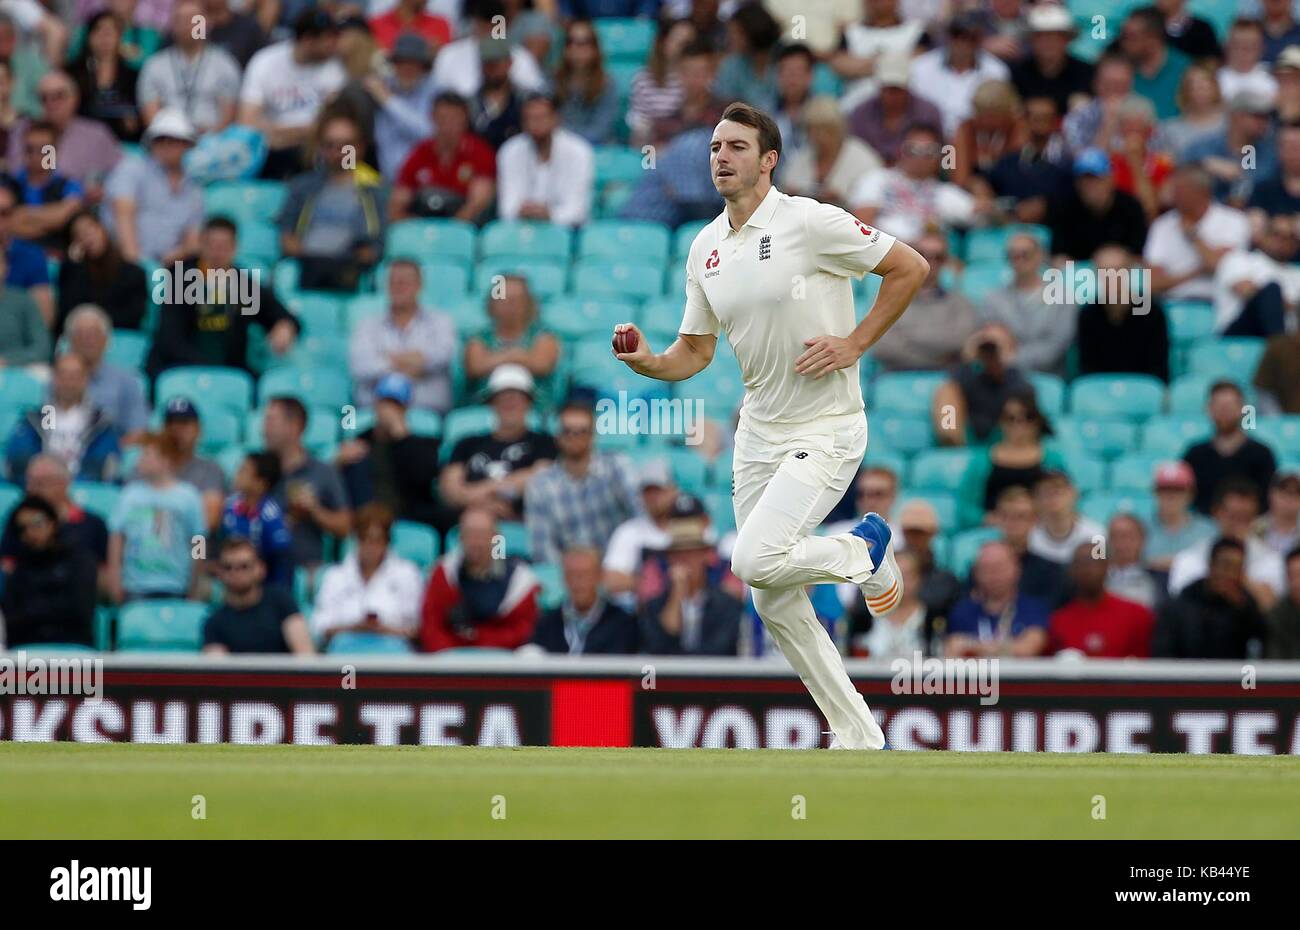 Toby Roland-Jones of England during day four of the third Investec Test match between England and South Africa at The Oval in London. 30 Jul 2017 Stock Photo